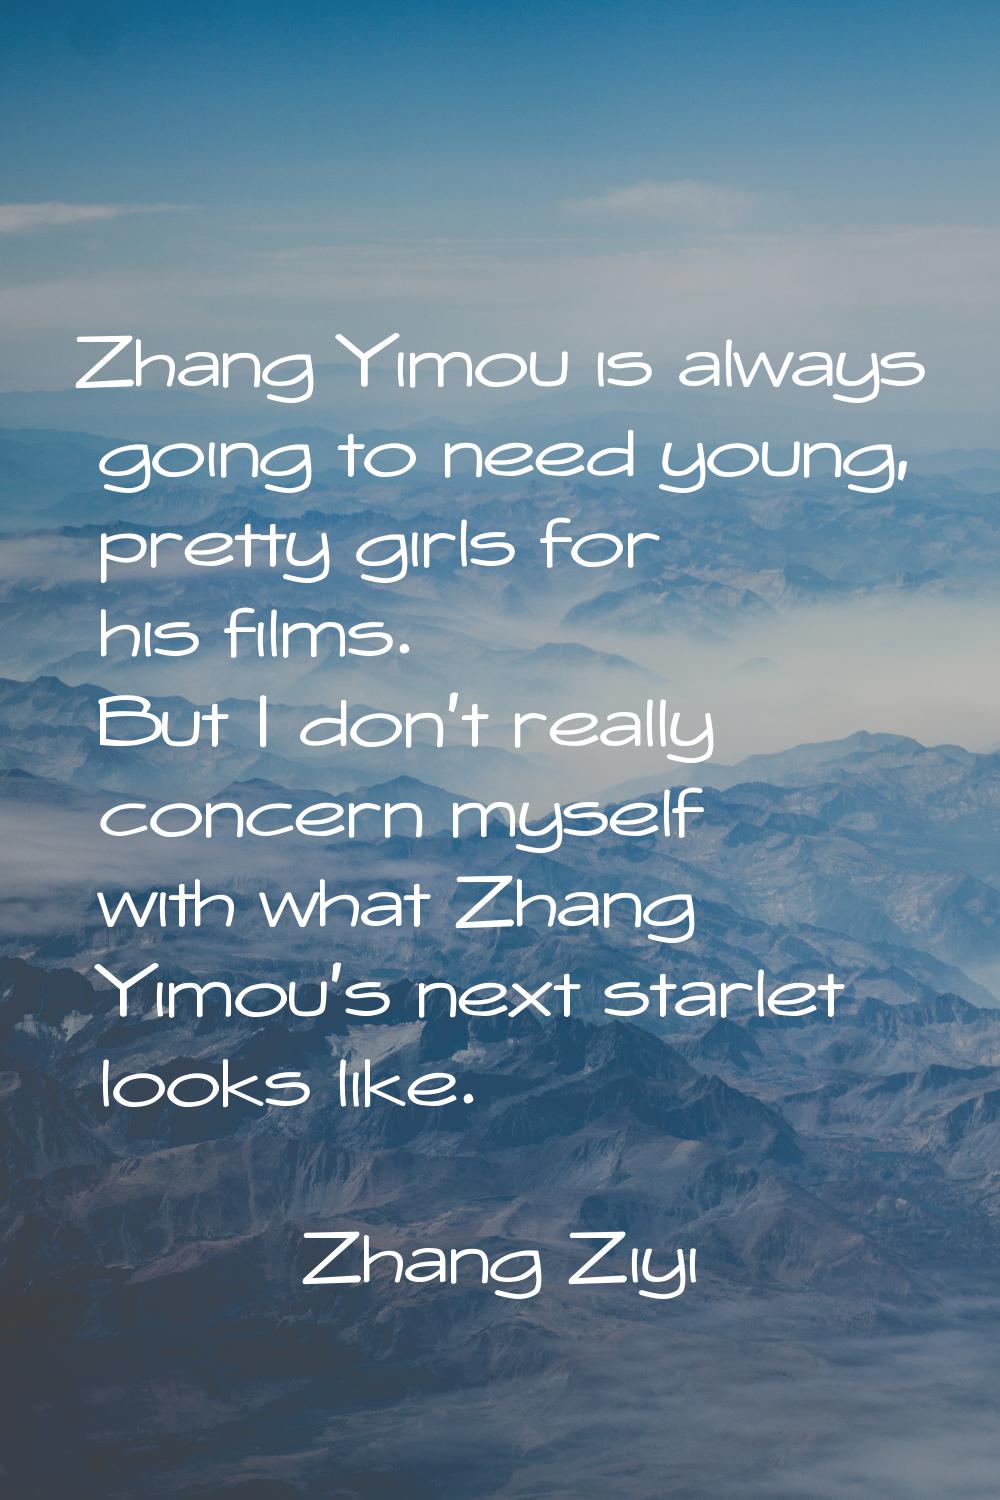 Zhang Yimou is always going to need young, pretty girls for his films. But I don't really concern m